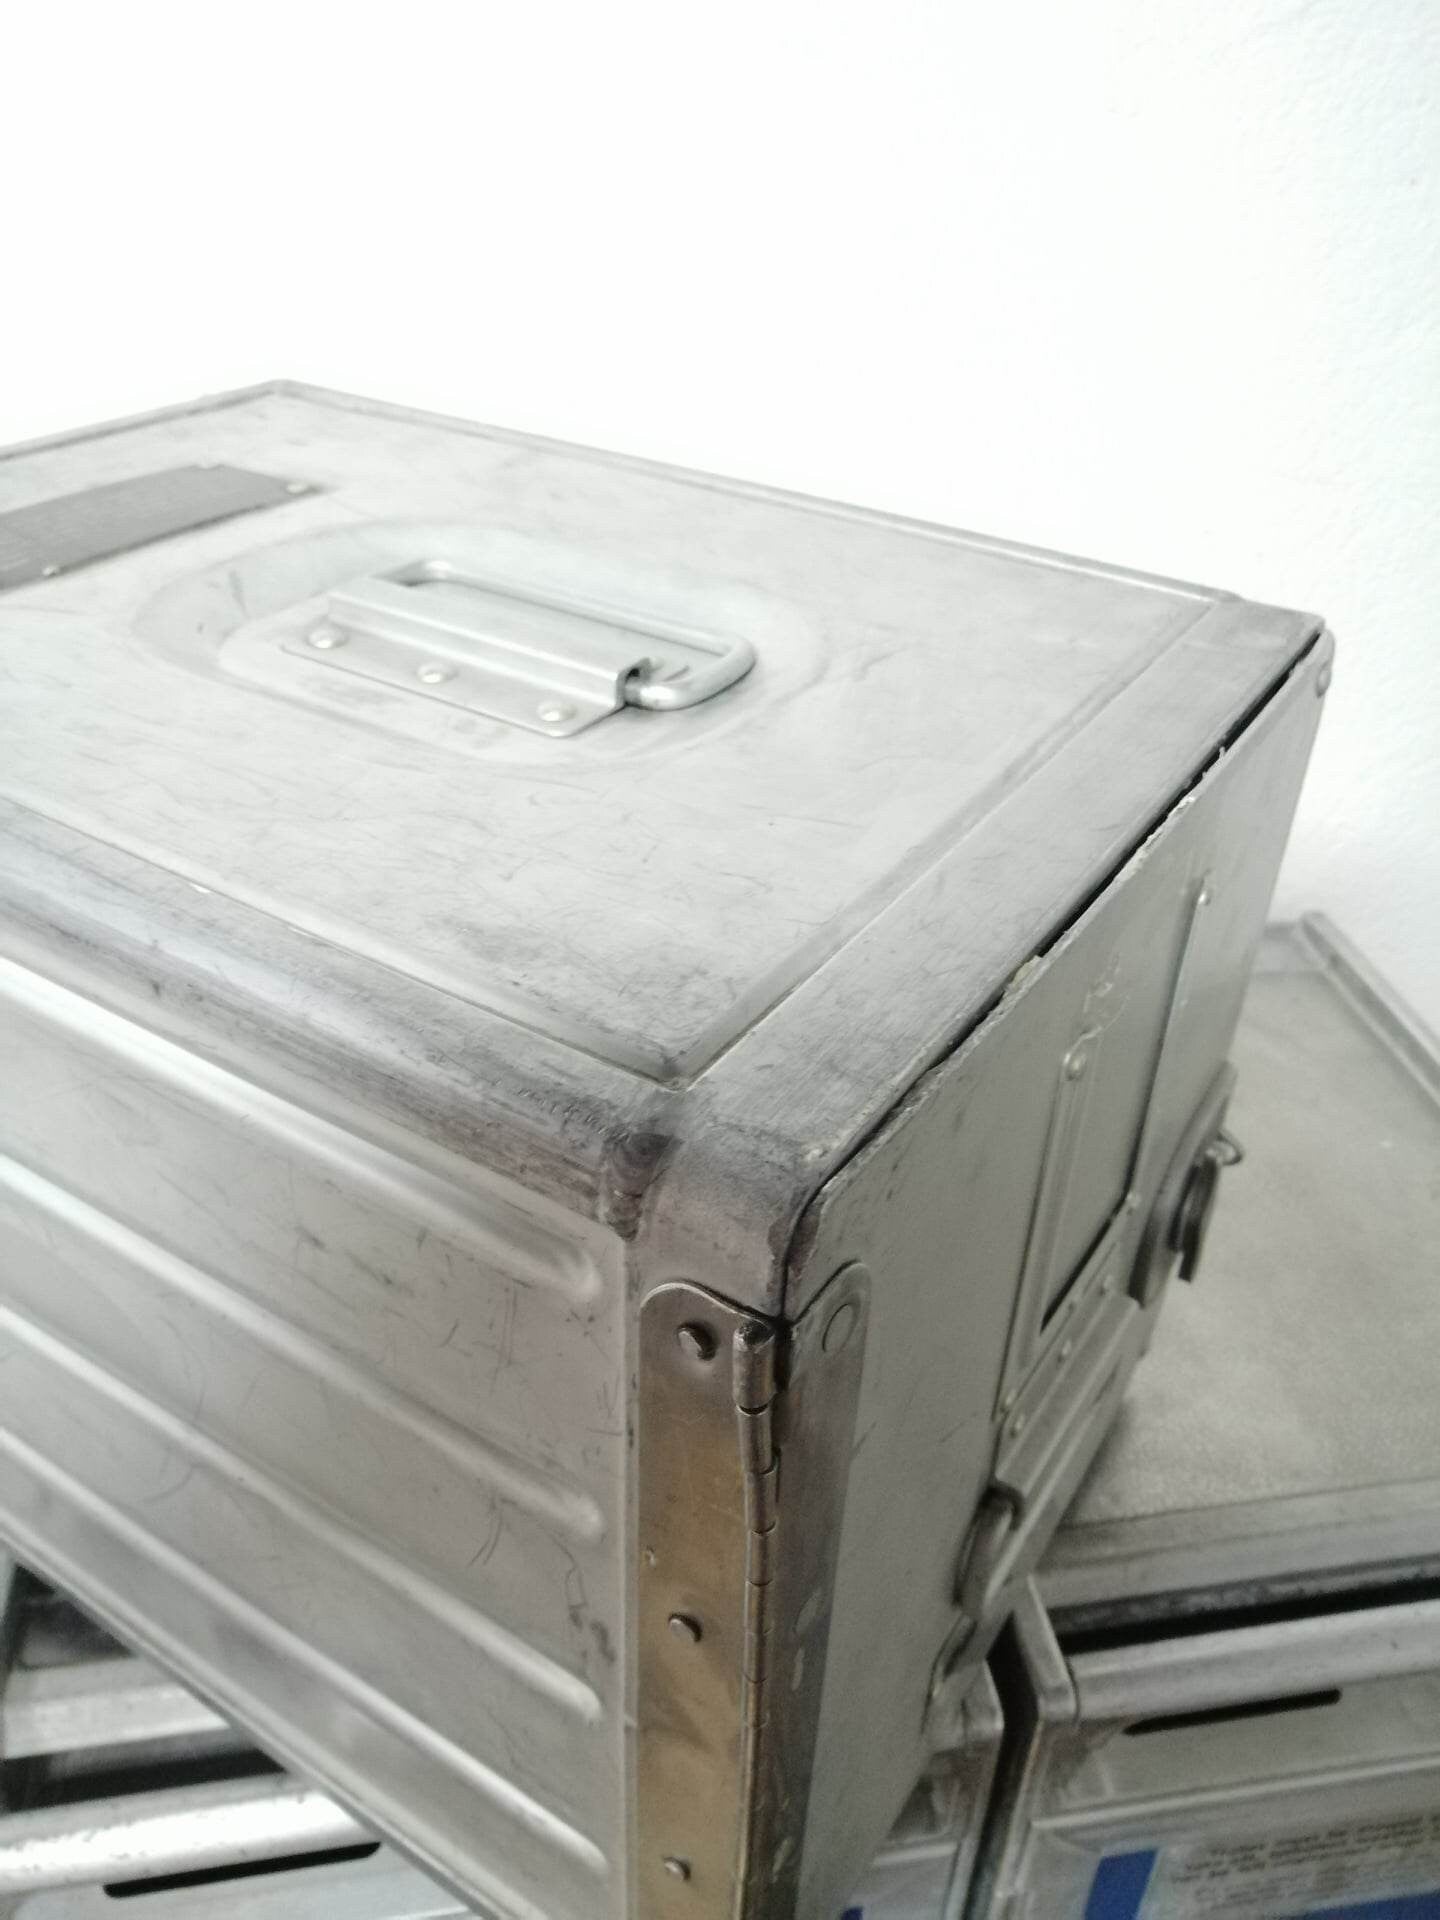 EasyJet Airline Galley Box, Aircraft Storage Container